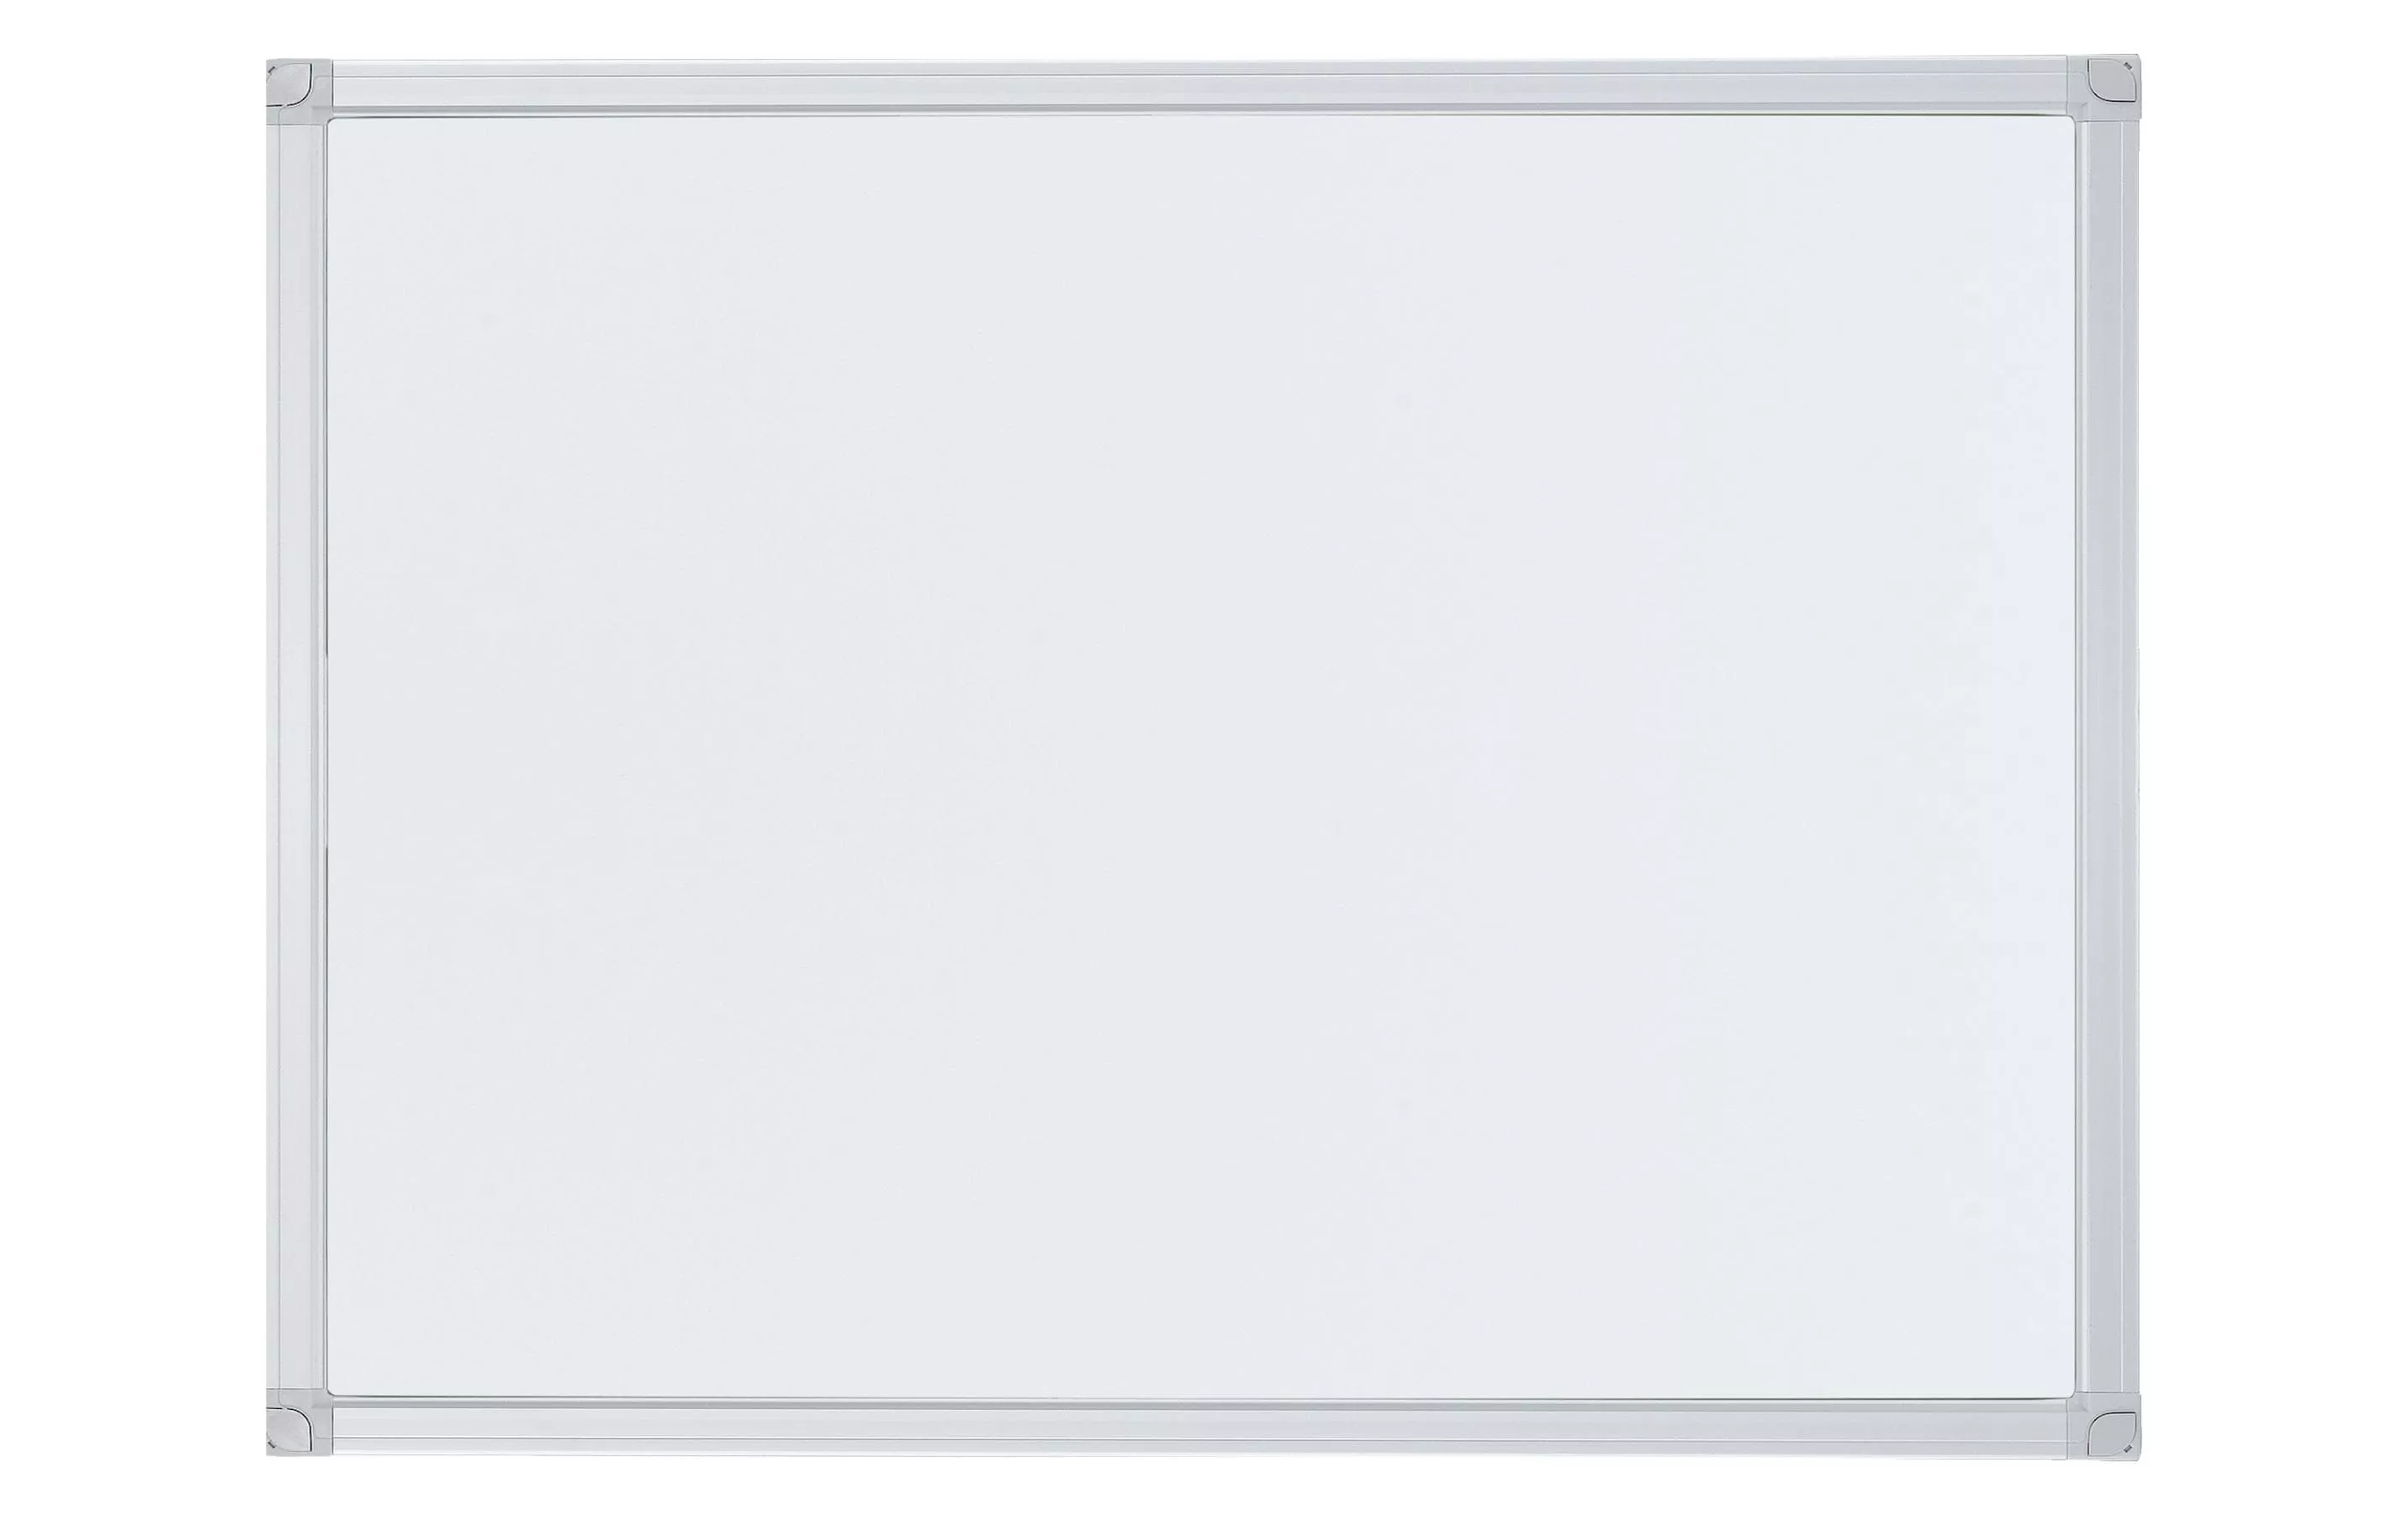 Magnethaftendes Whiteboard X-tra!Line 45 cm x 60 cm, Weiss